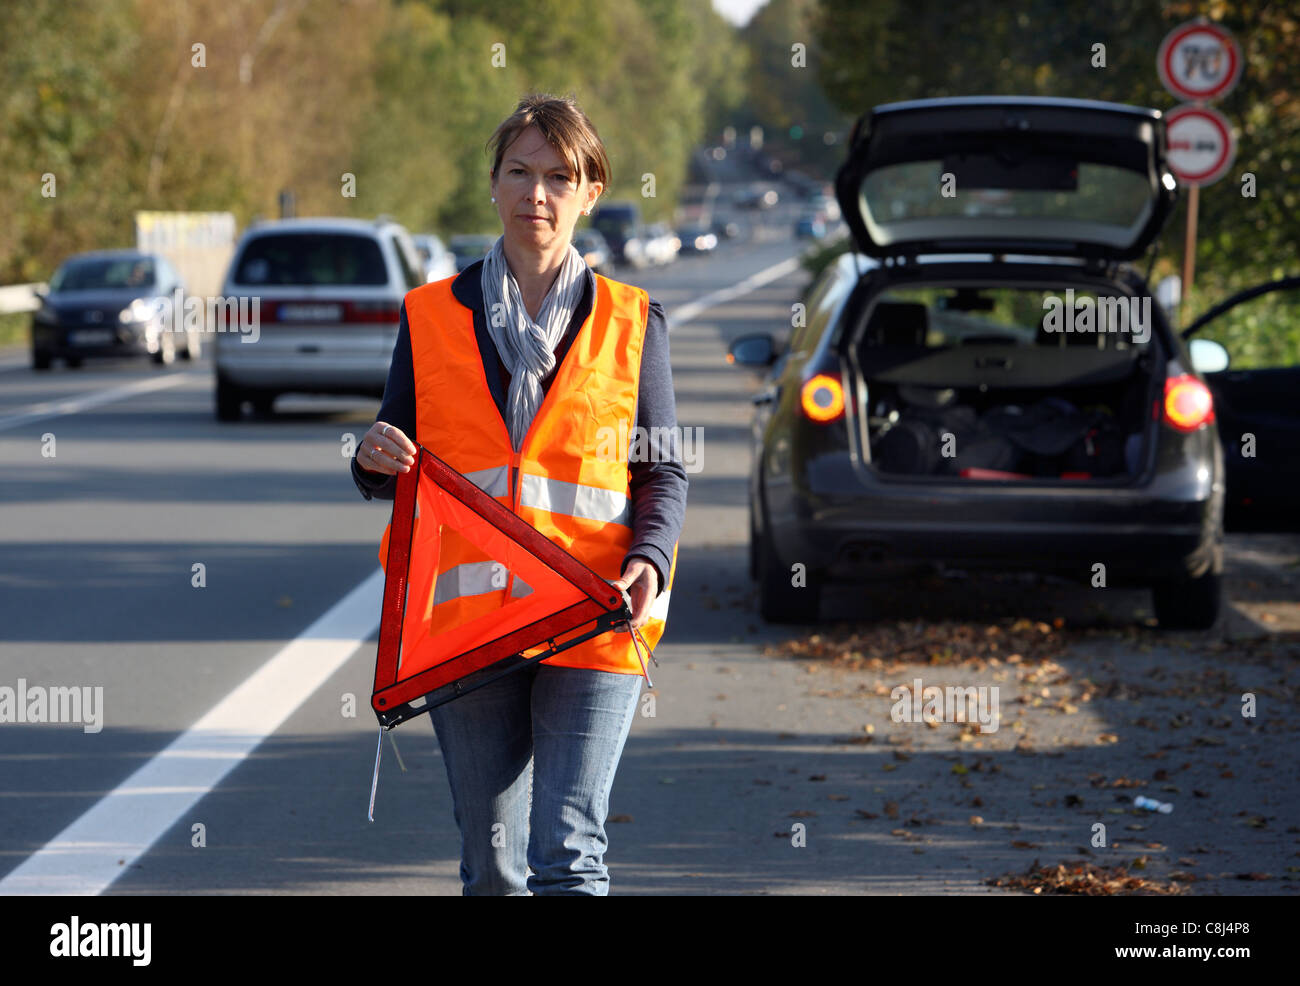 Car breakdown, on a highway, female driver, wearing a high visibility vest,  set up a warning triangle. Stock Photo